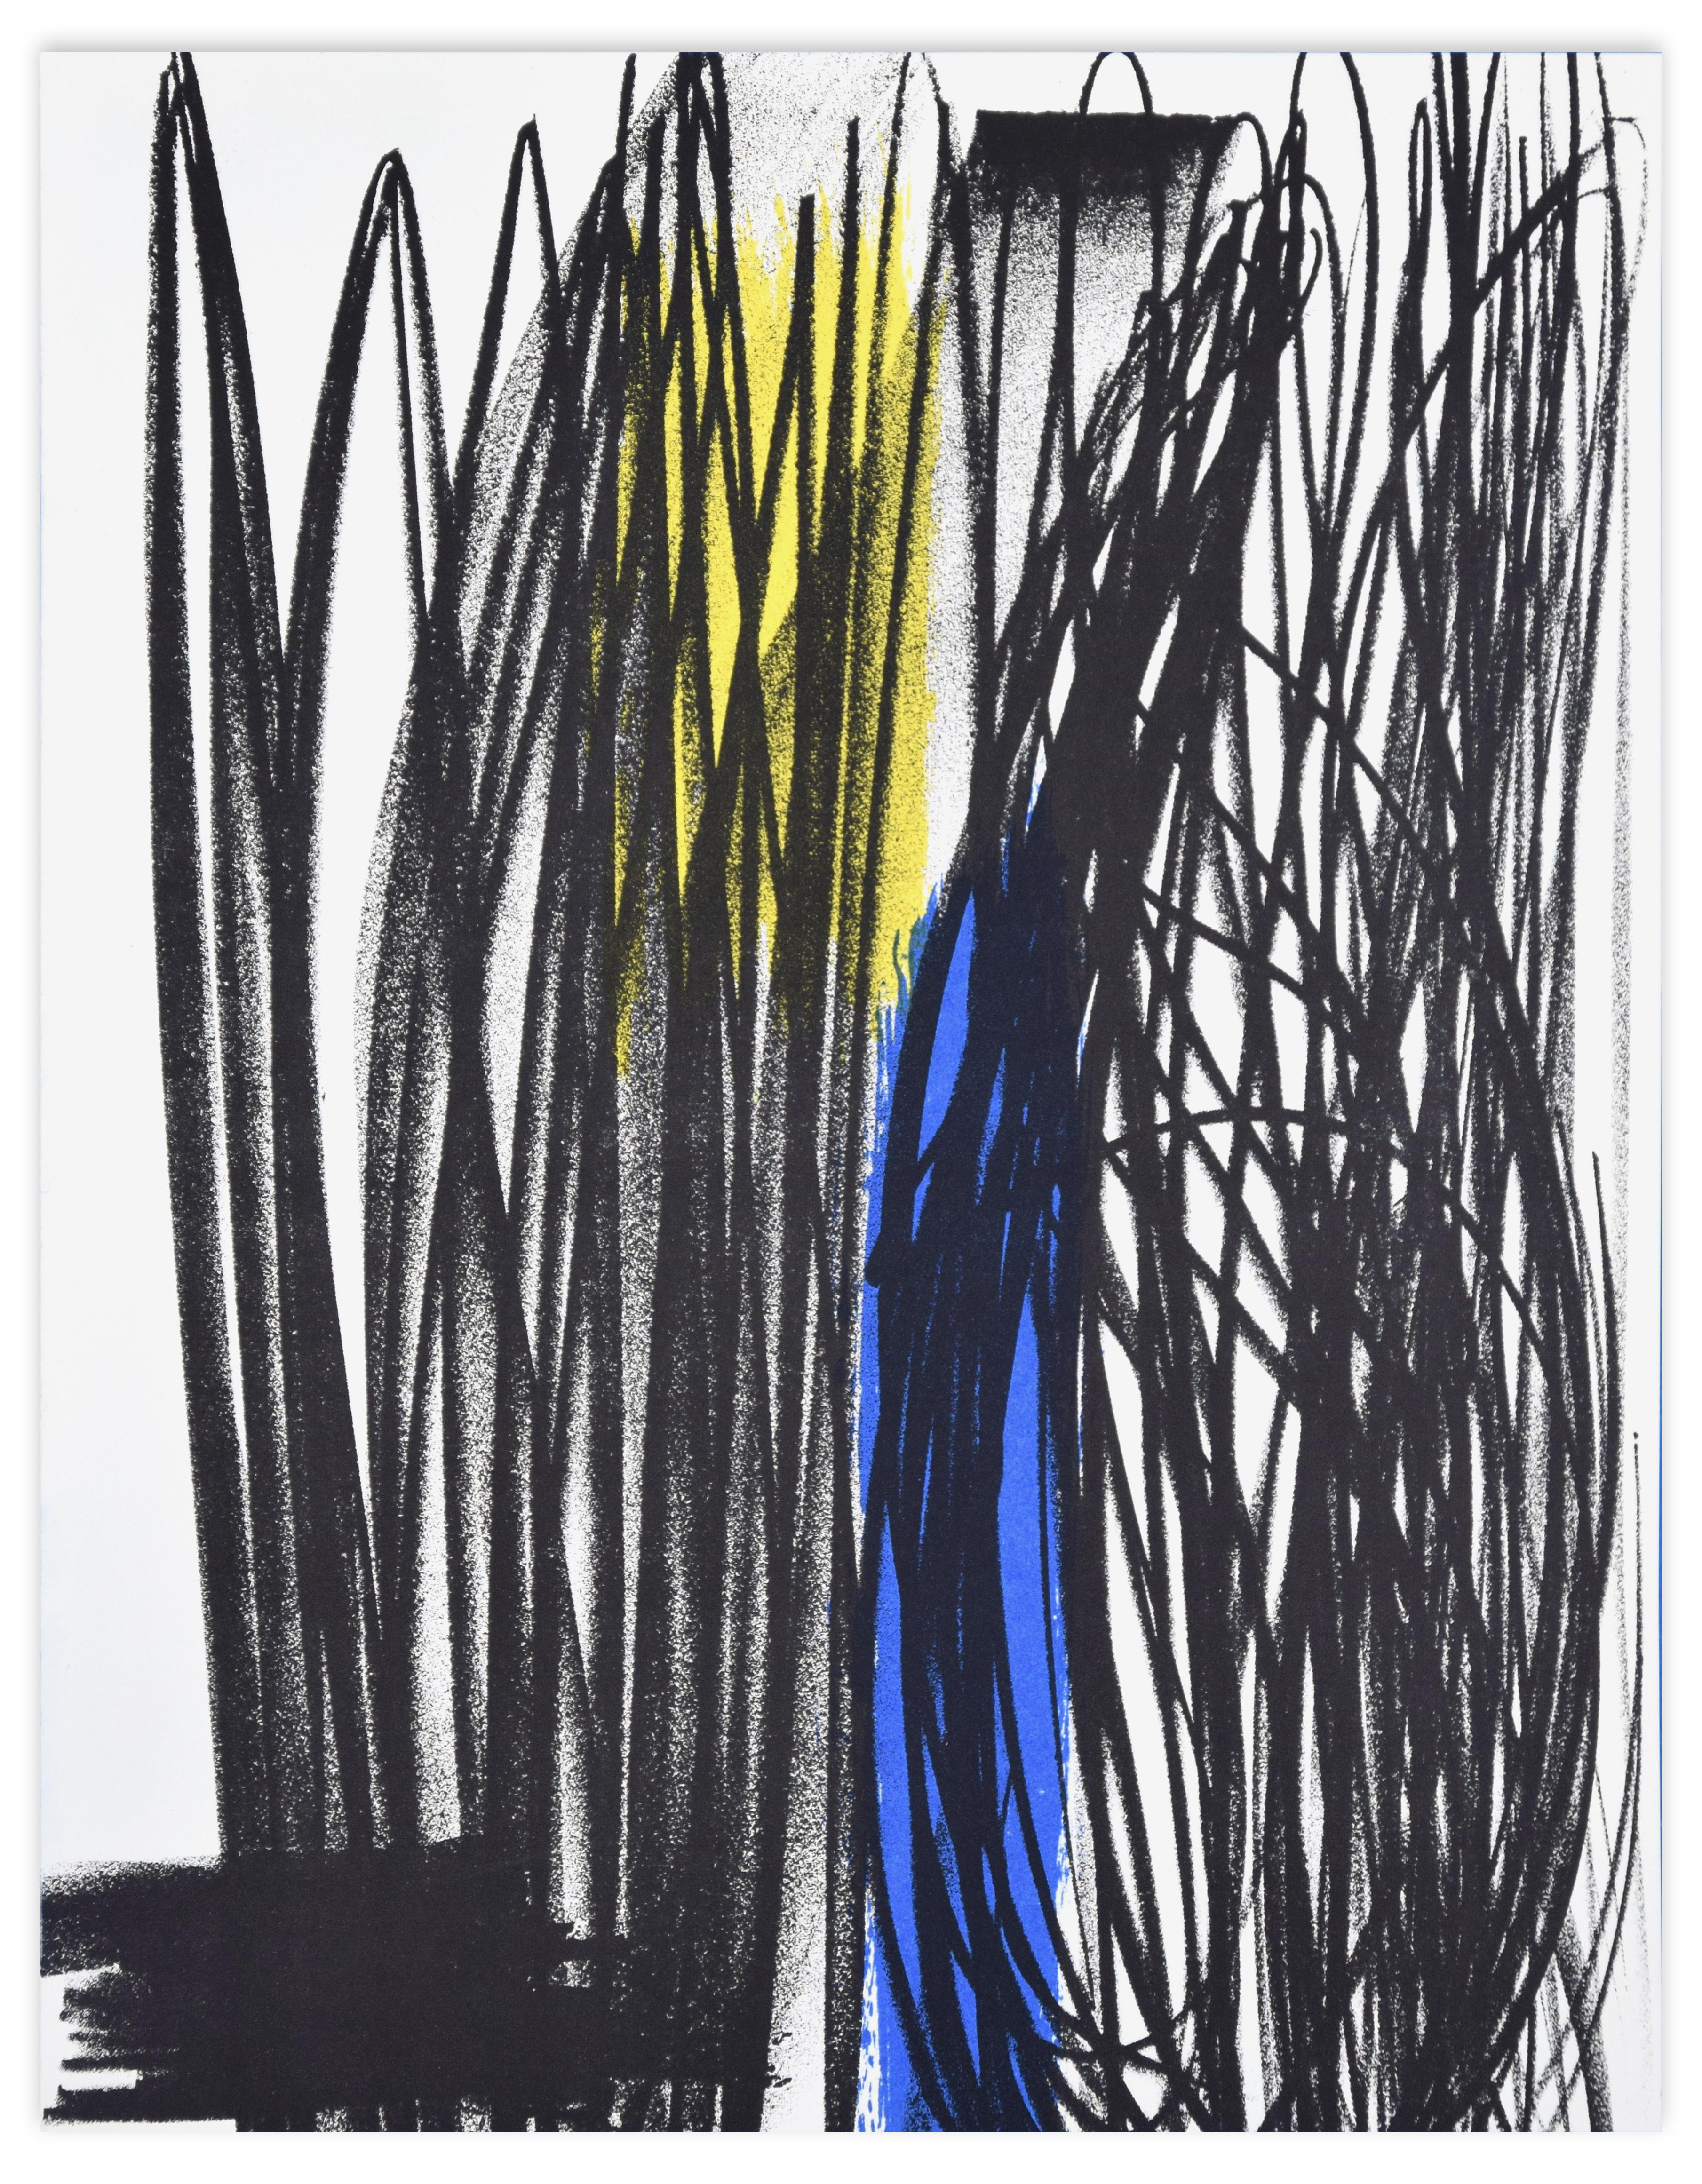 Influence - Original Lithograph by Hans Hartung - 1975 1